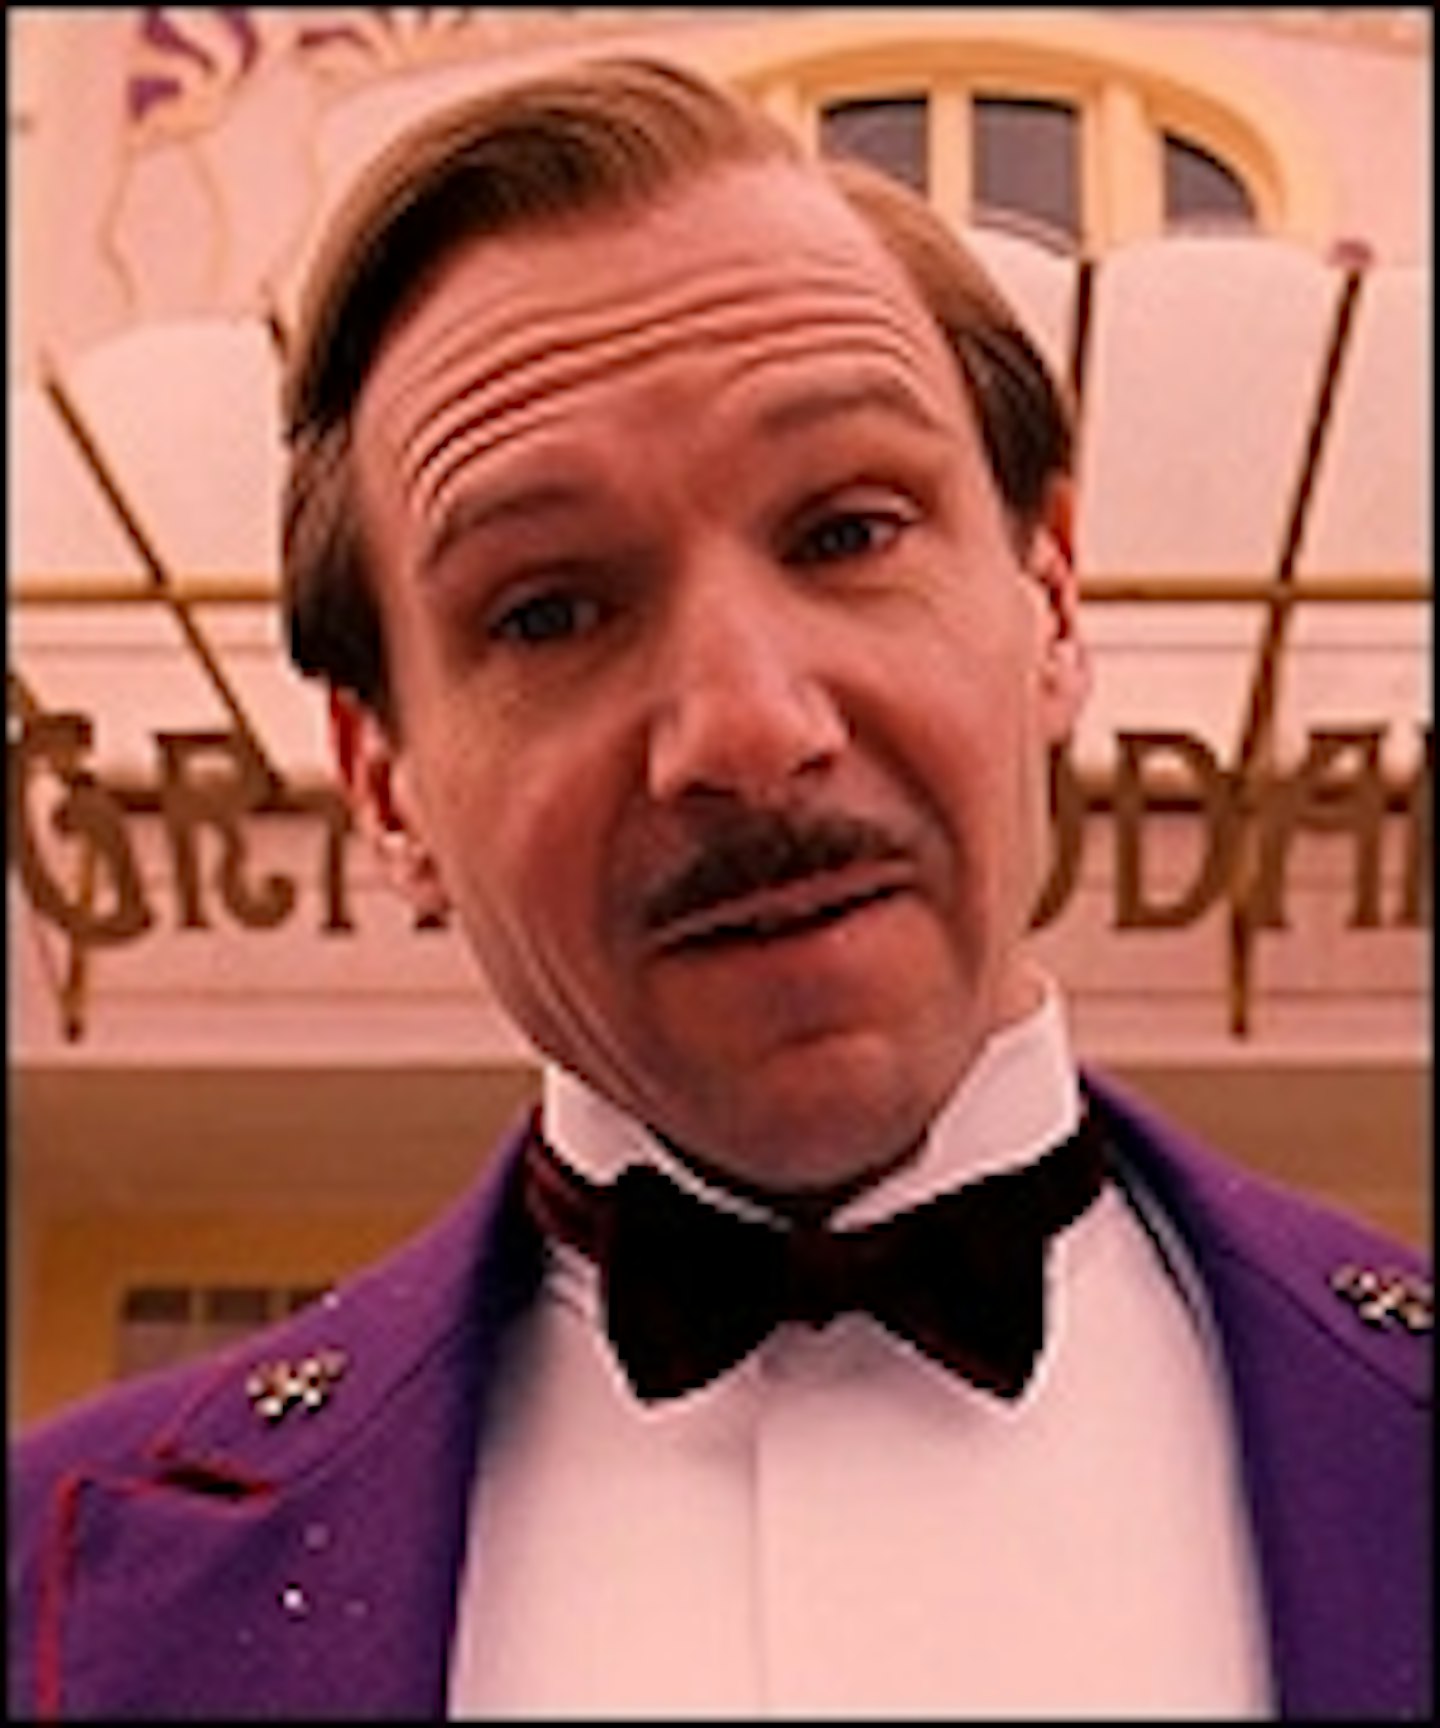 Two New Grand Budapest Hotel Clips Online